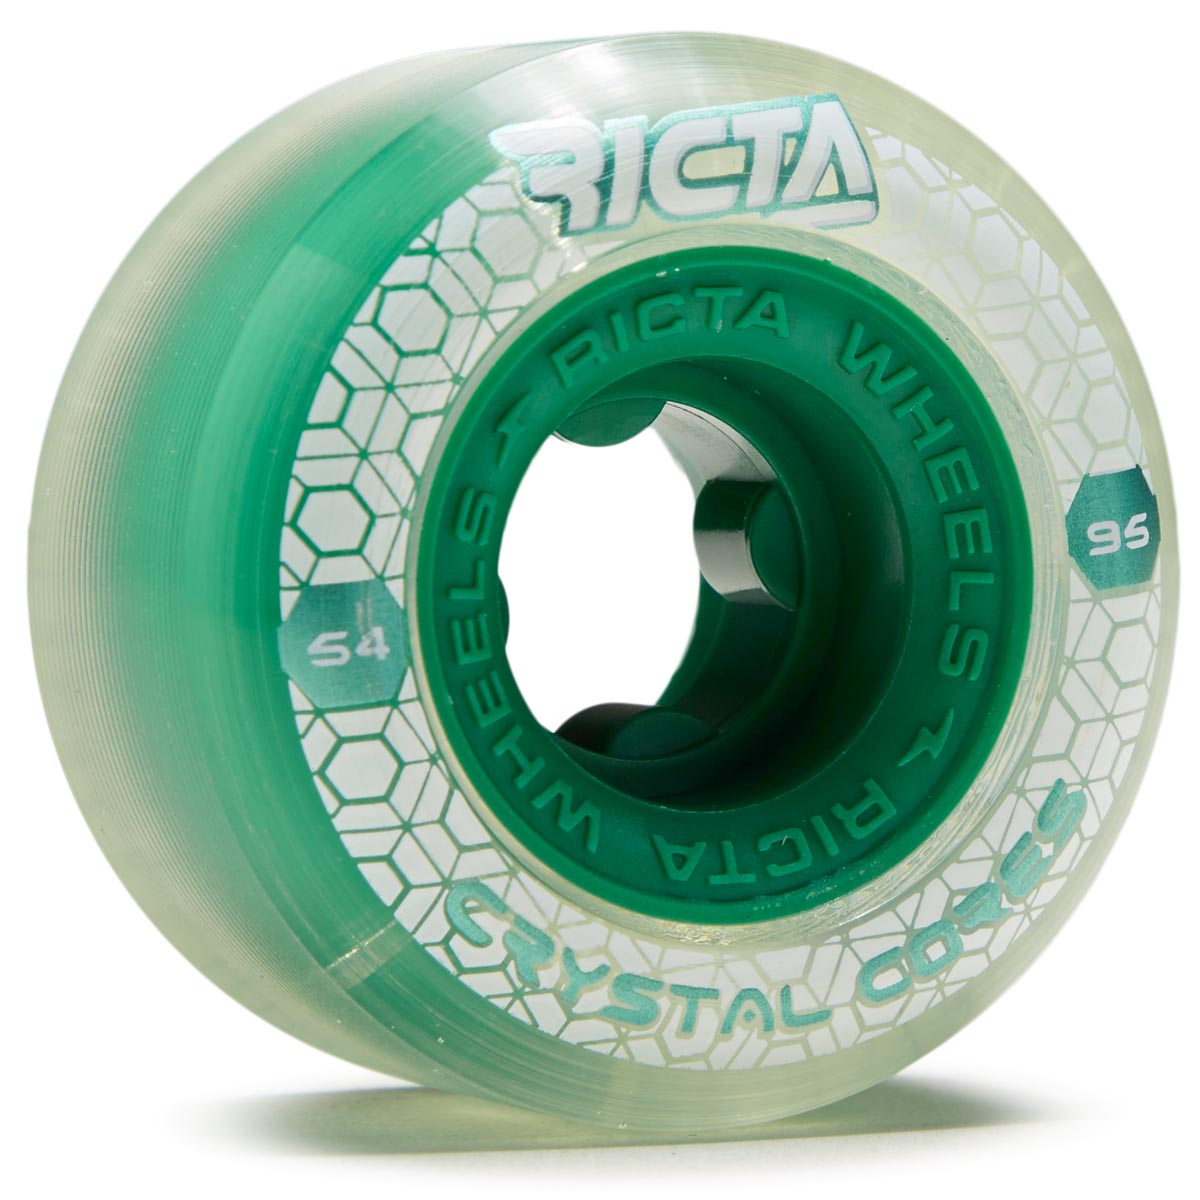 Ricta Crystal Cores Wide 95a Skateboard Wheels - Clear - 54mm image 1